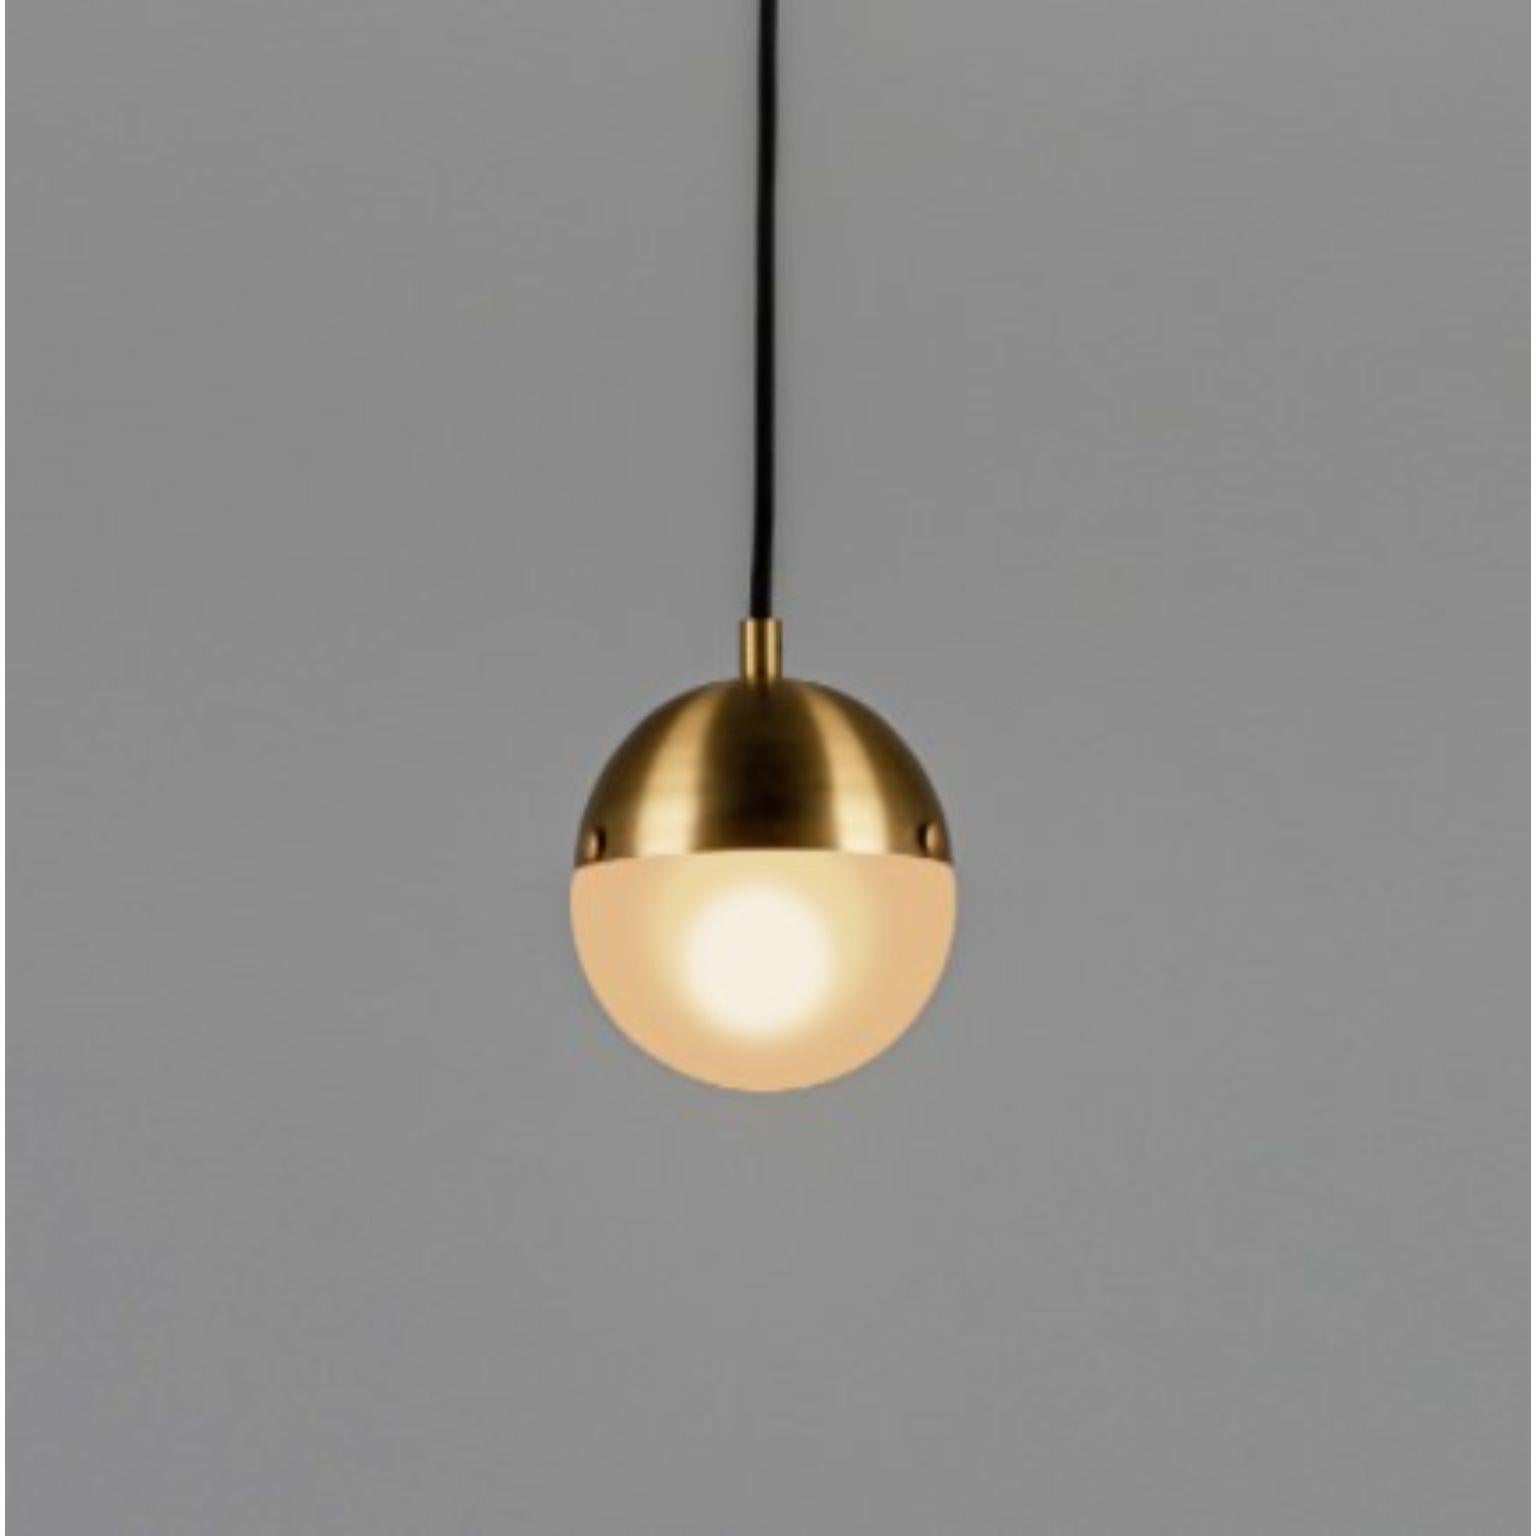 Molecule single pendant by Schwung
Dimensions: D 12 x H 305 cm
Materials: Brass, opal glass
Weight: 1.4 kg

Finishes available: Black gunmetal, polished nickel, brass
Other sizes available.

 Schwung is a german word, and loosely defined,